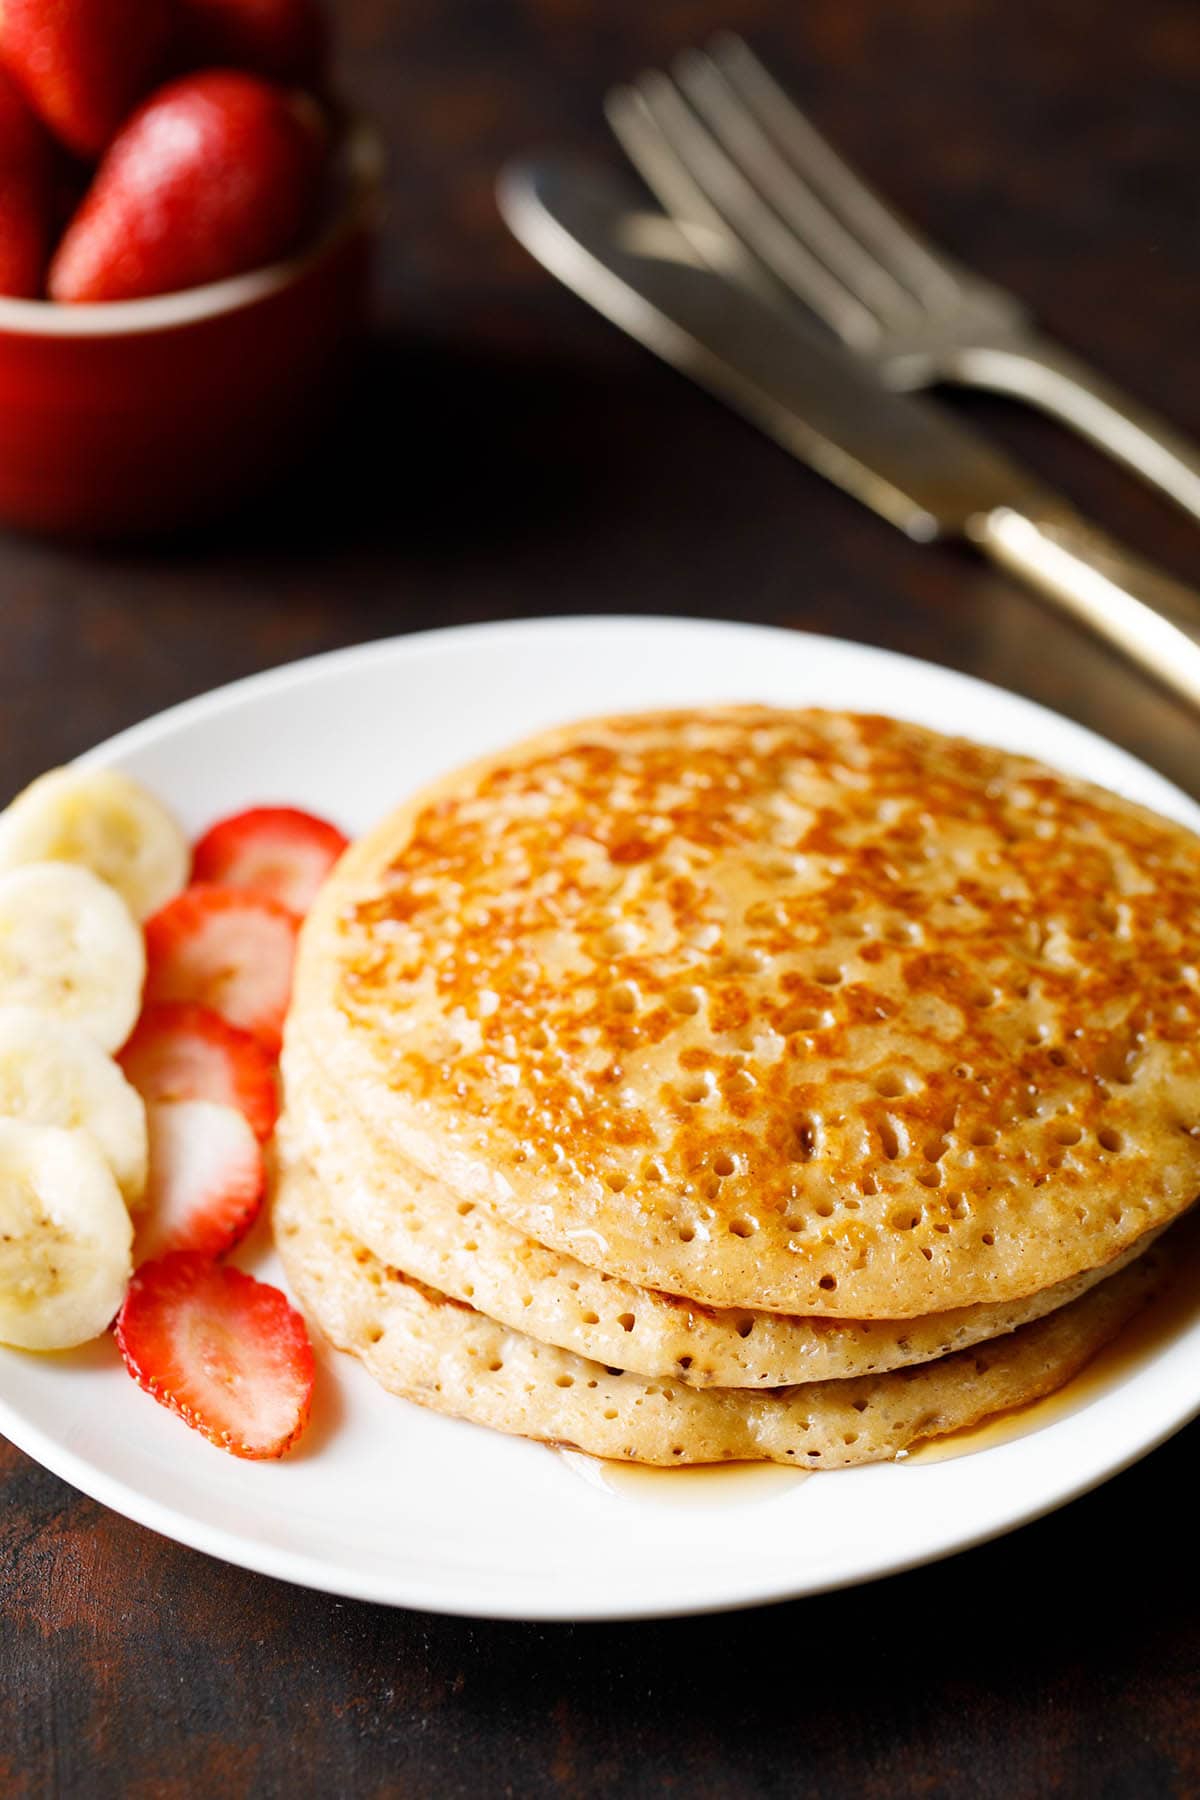 stack of pancakes with maple syrup drizzled and sliced bananas and strawberries on white plate.